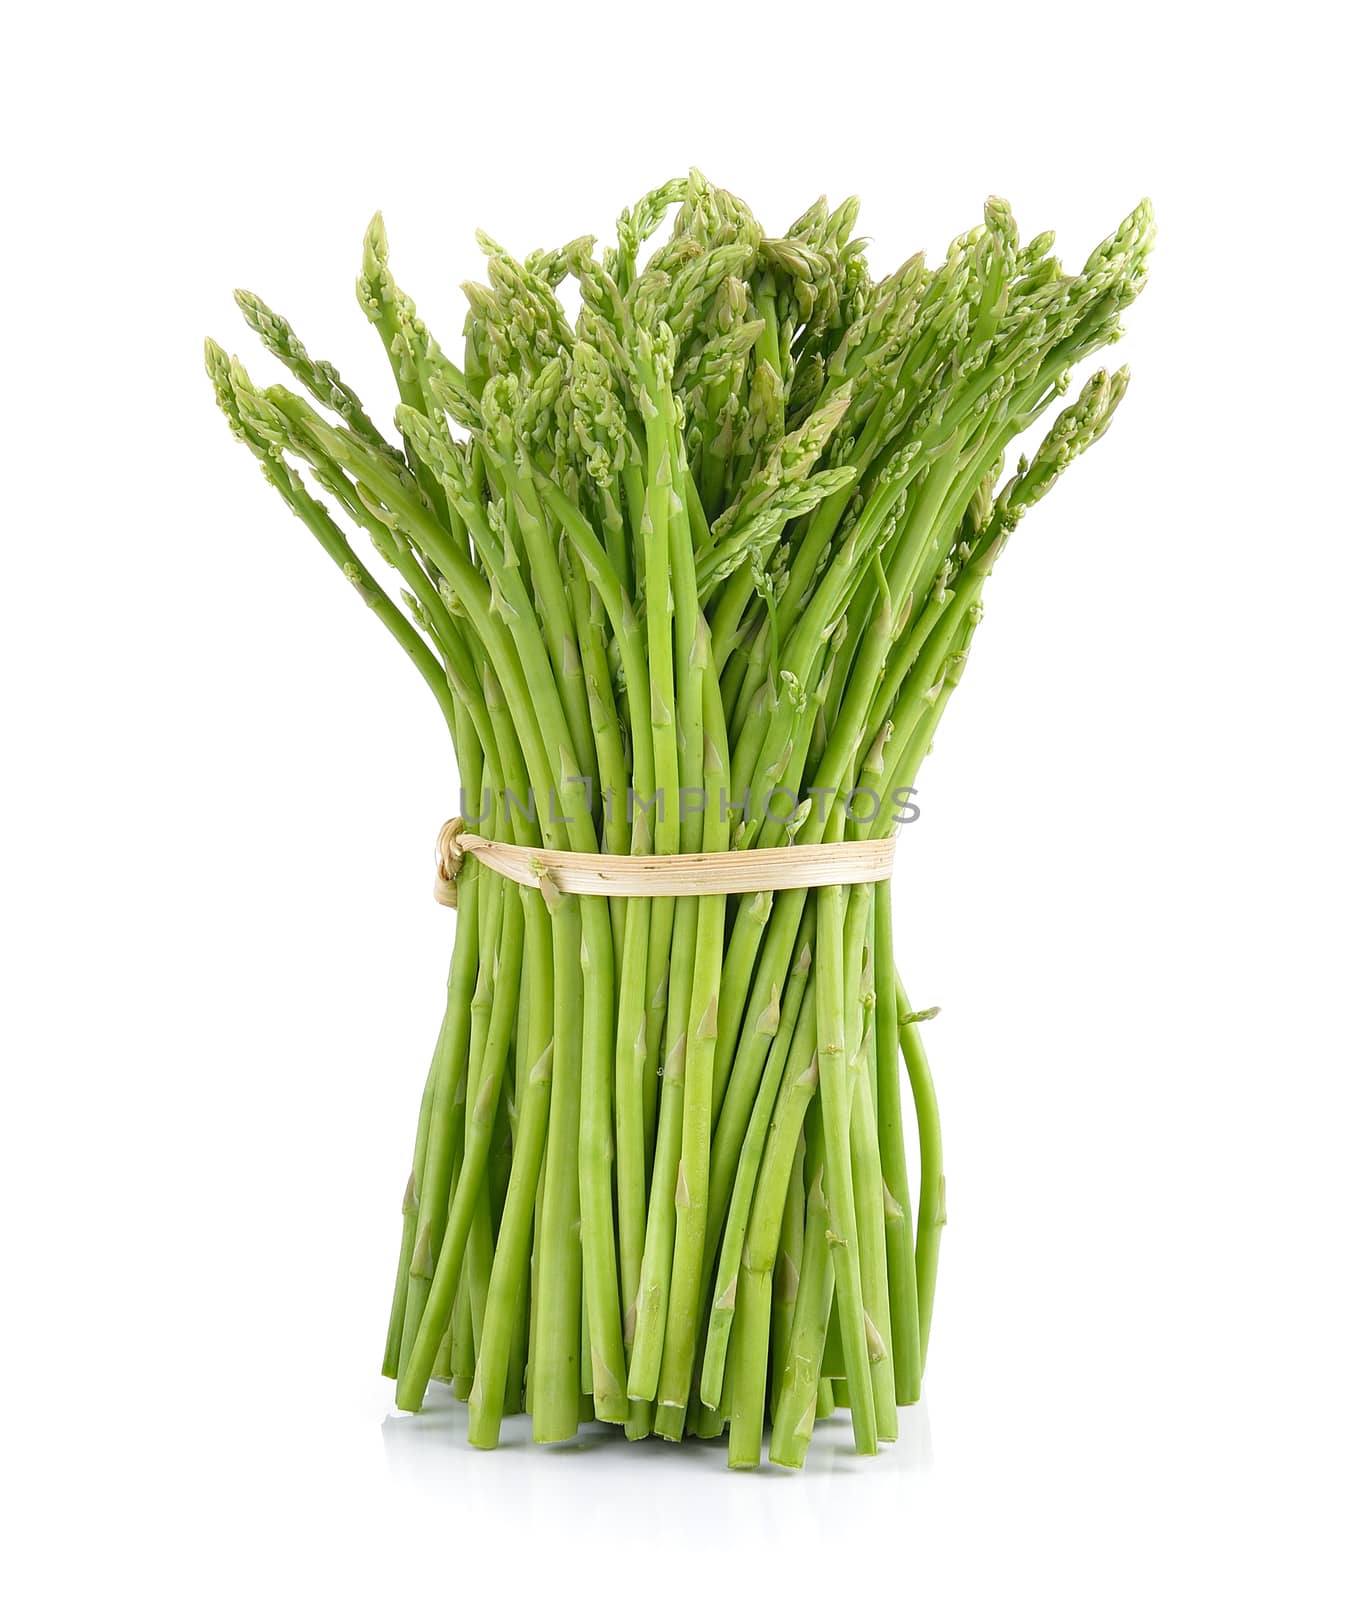 asparagus on white background by sommai